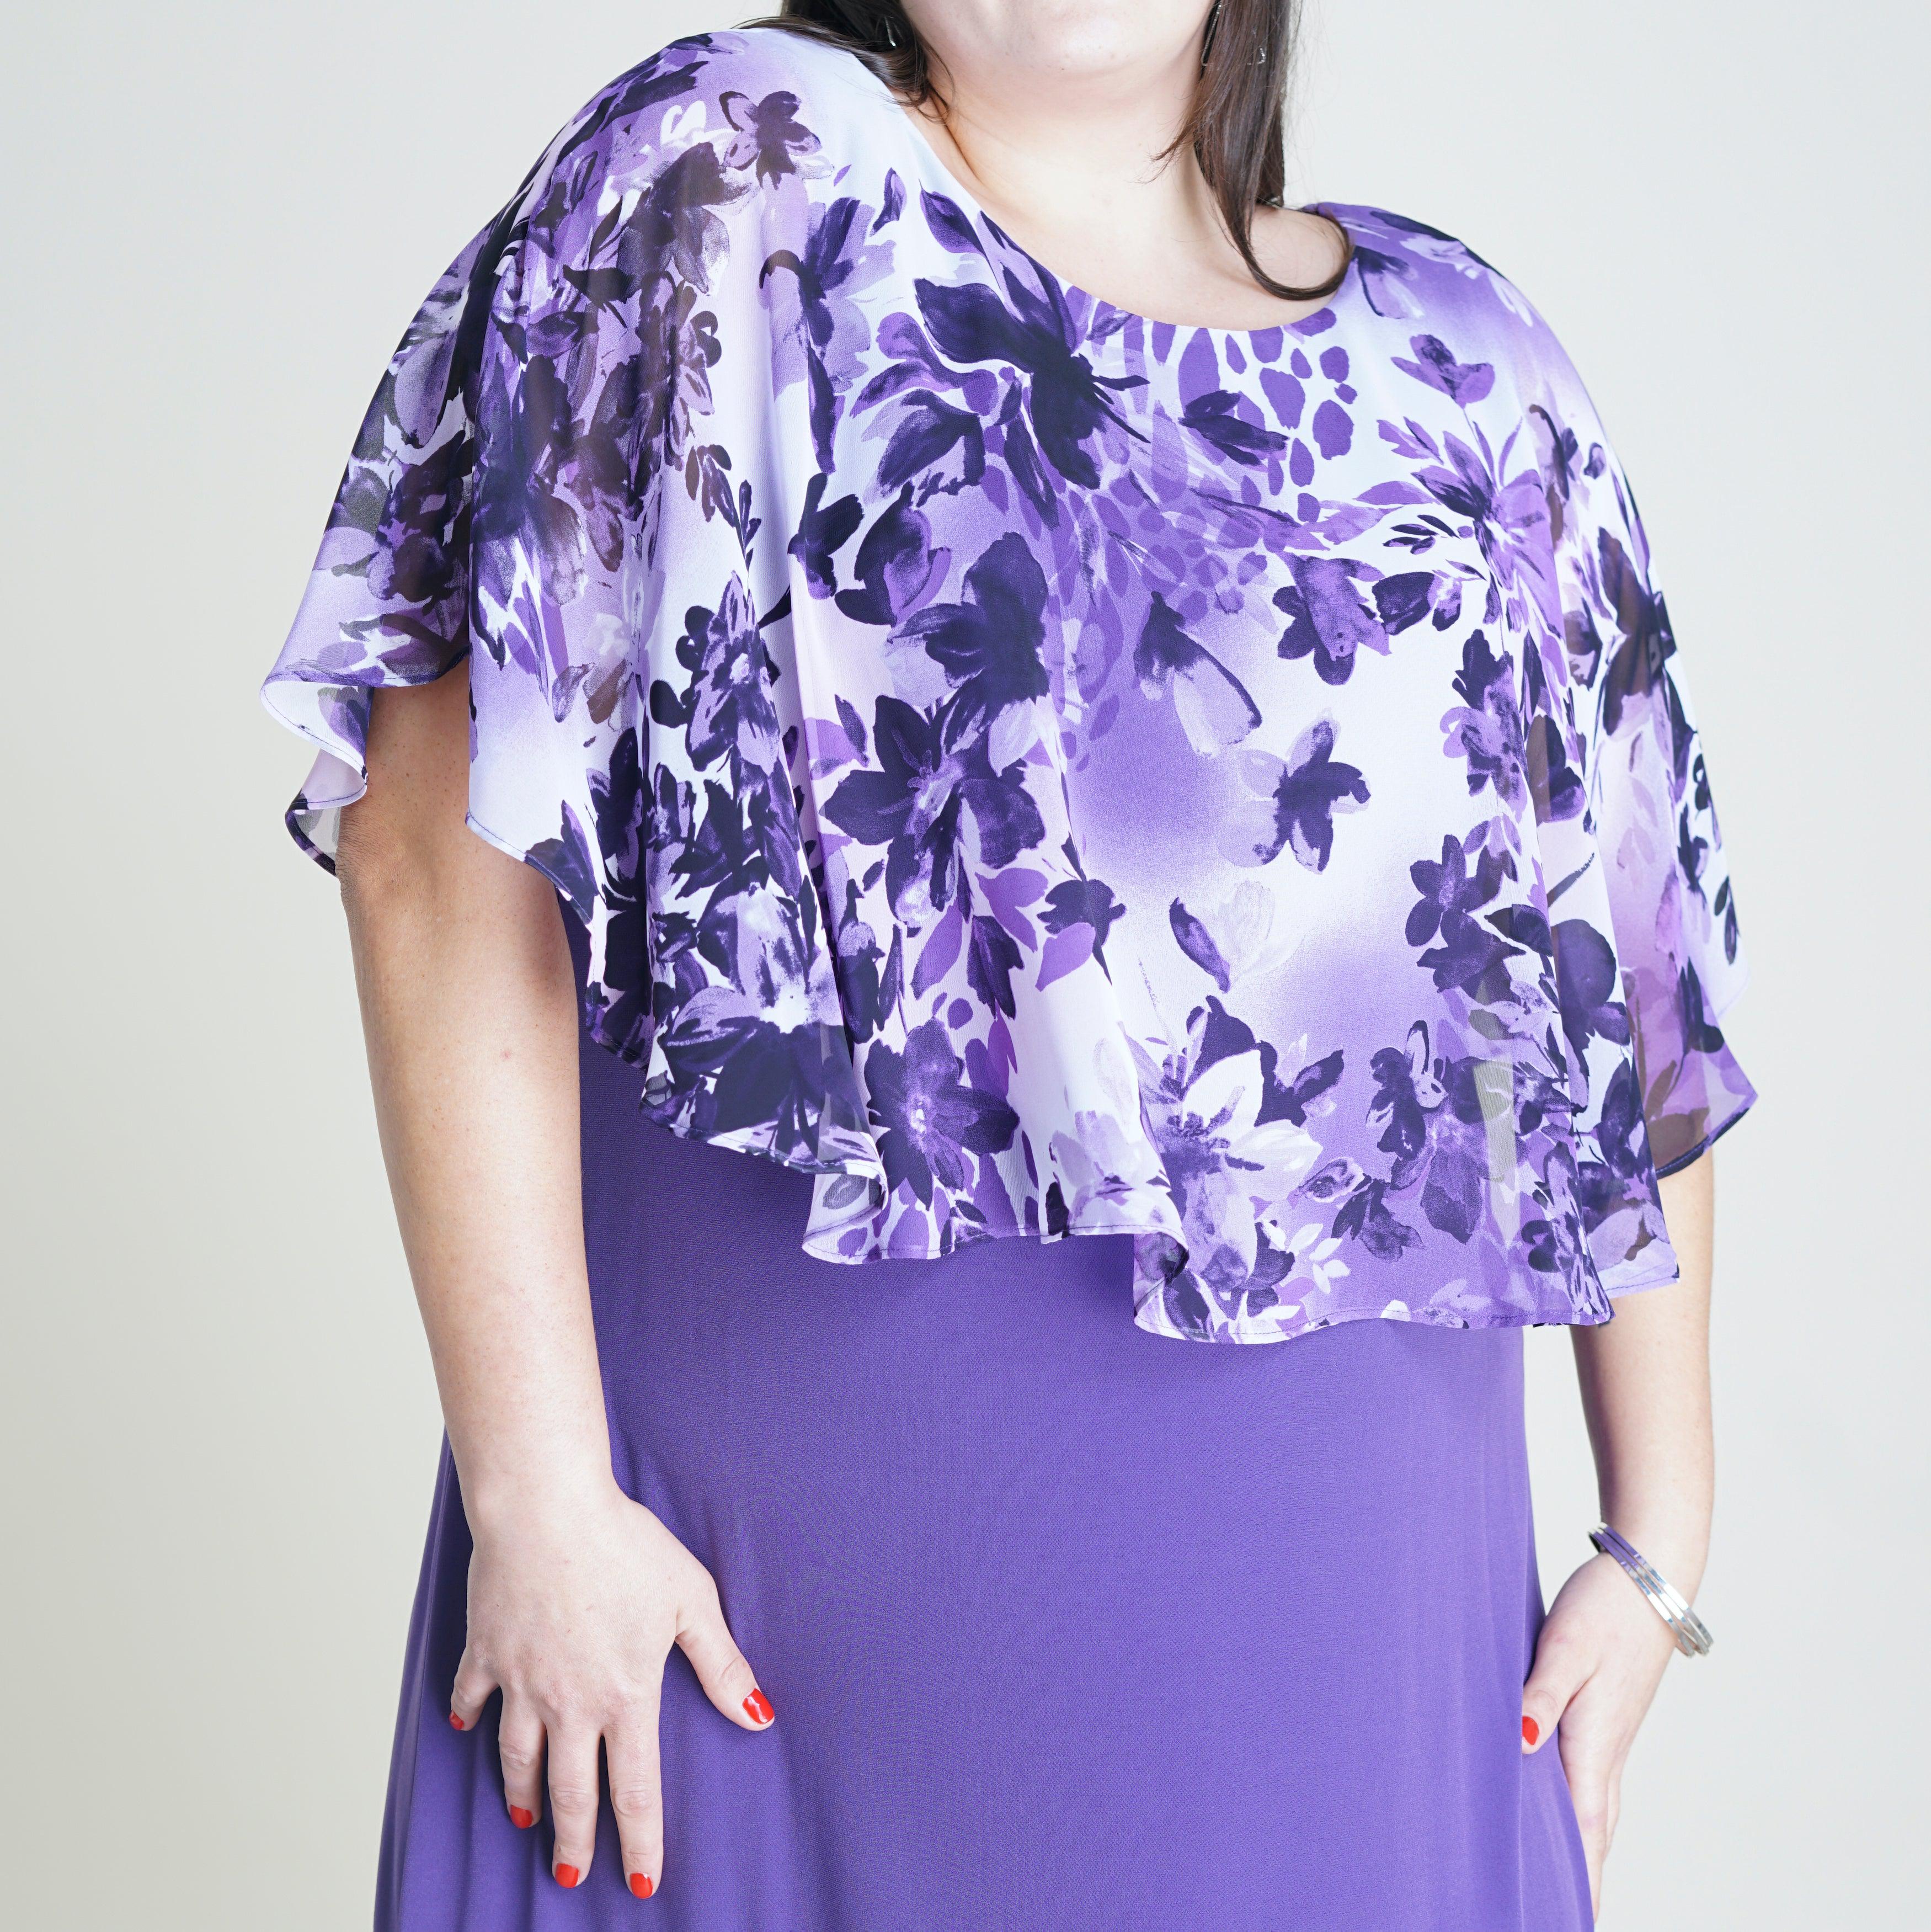 Woman posing wearing Purple Alyssa Purple Floral Cape Dress from Connected Apparel